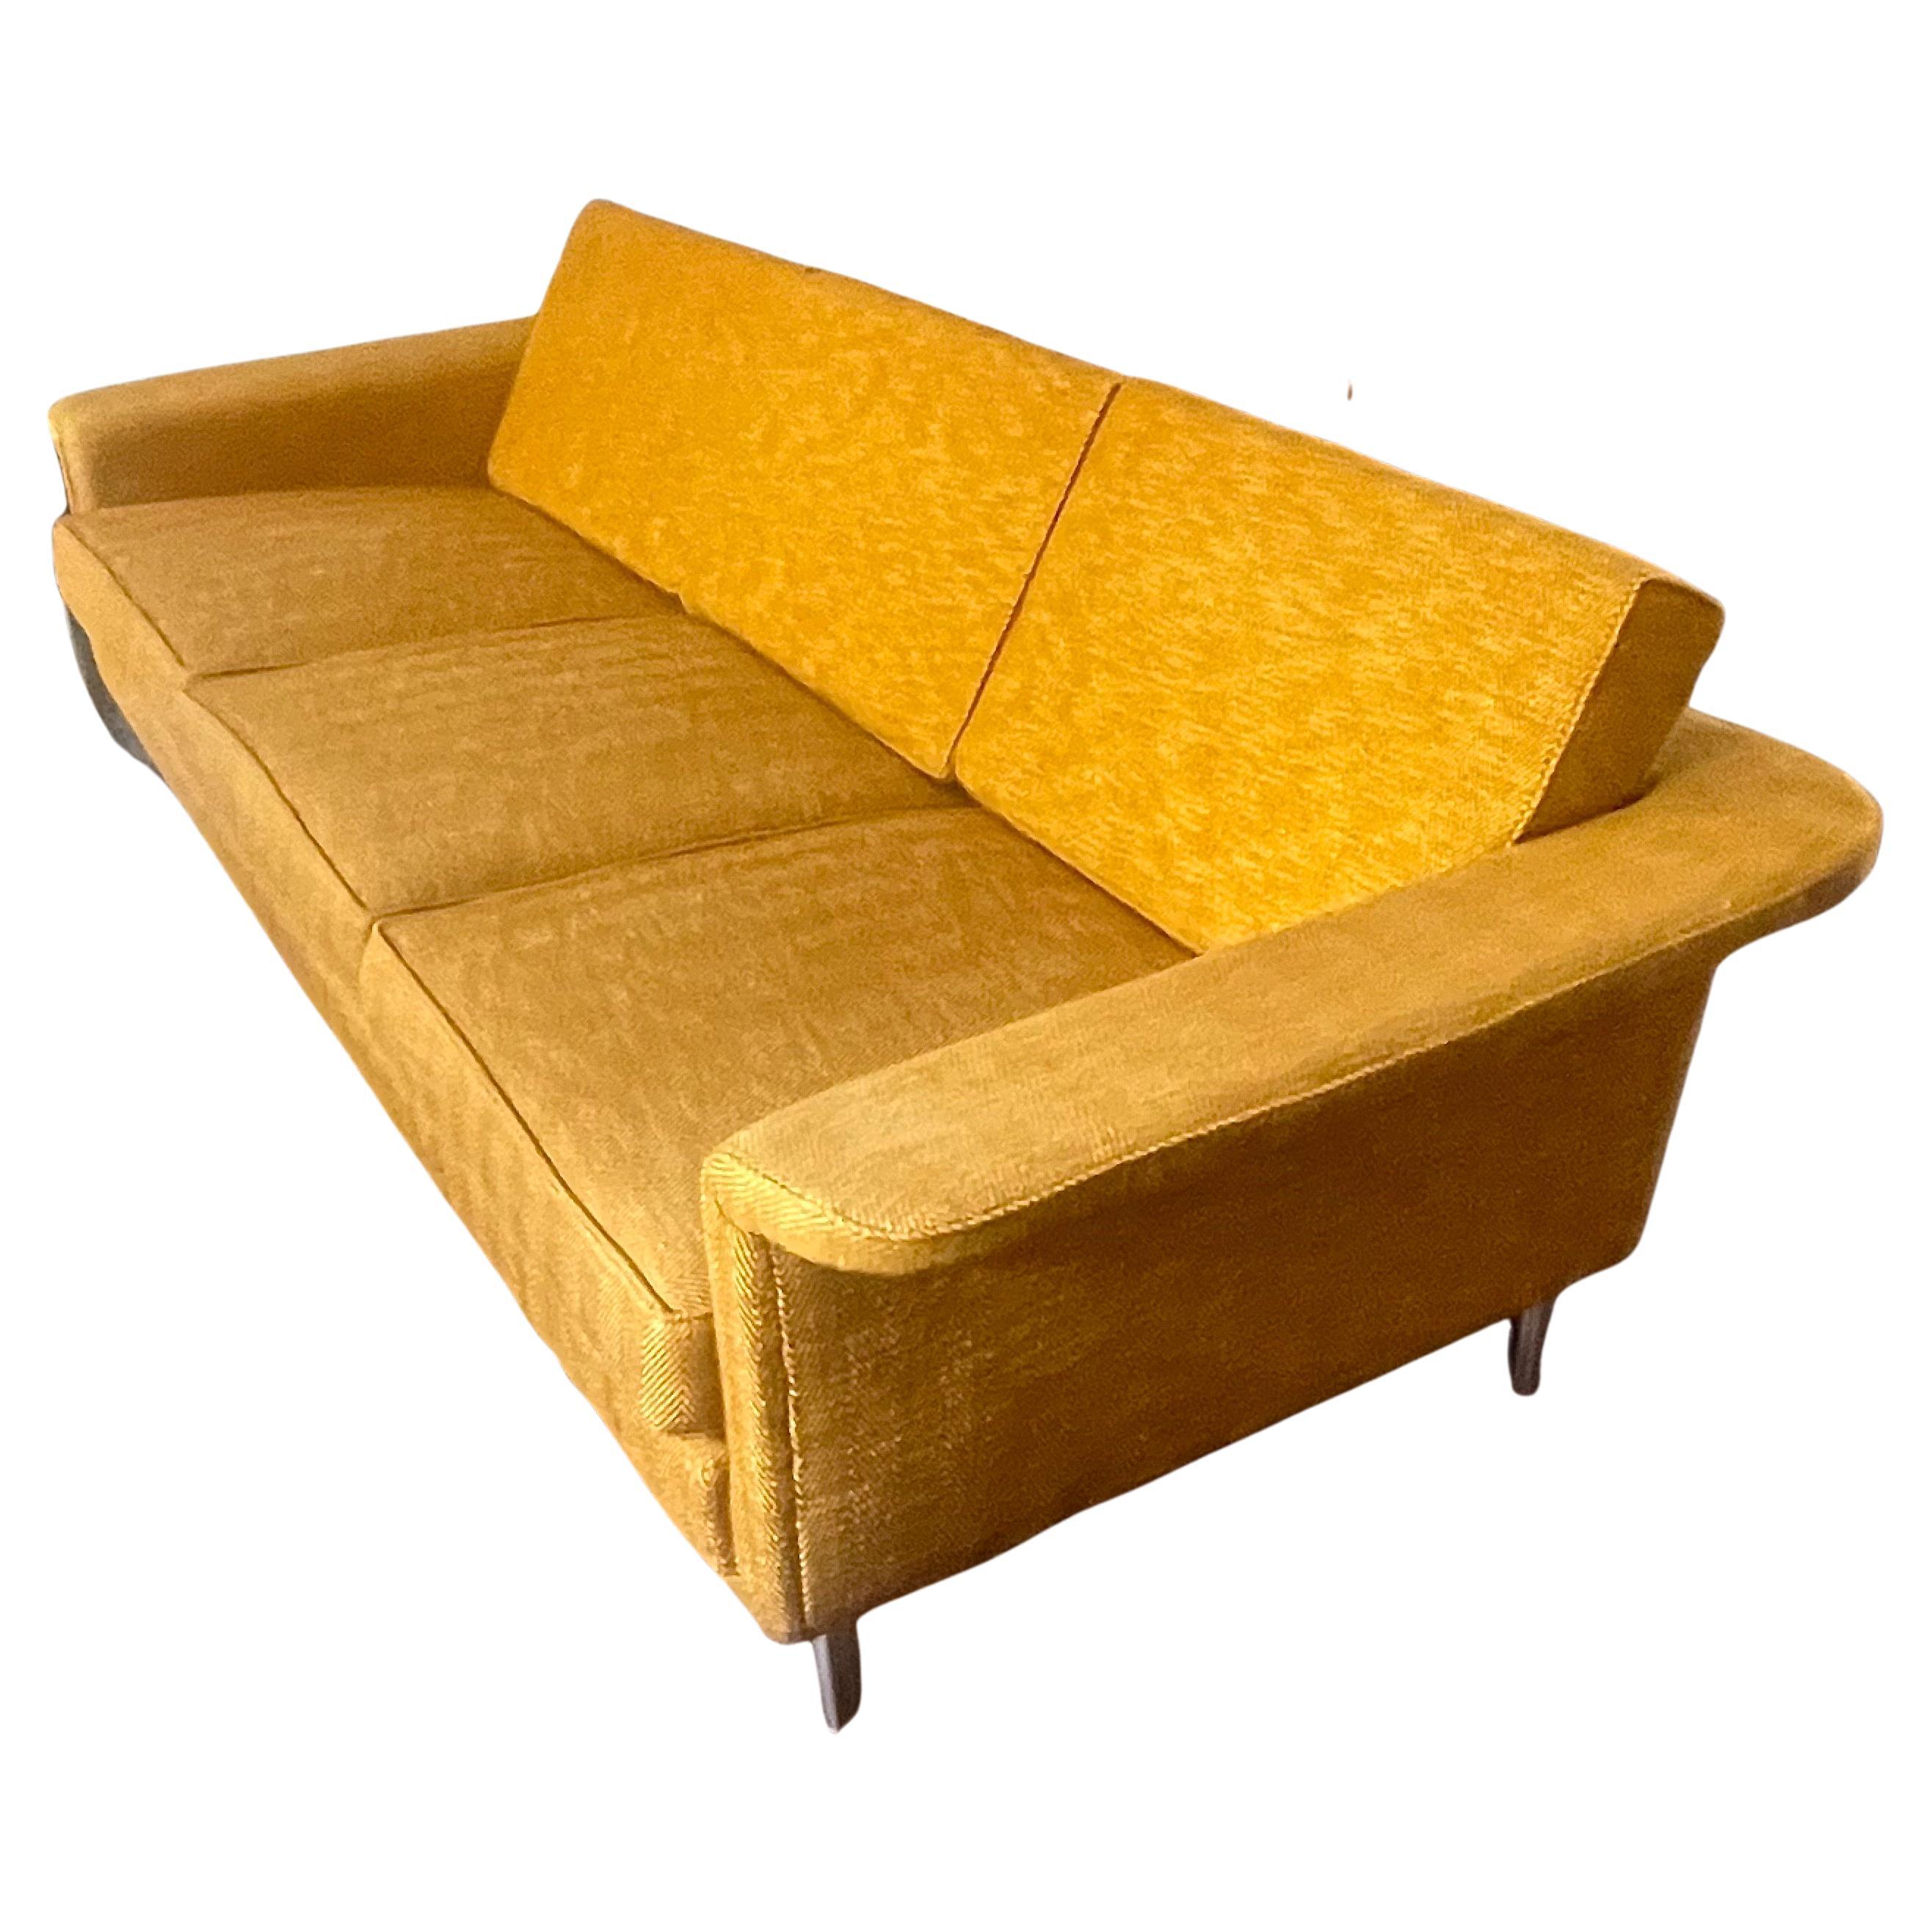 Set of Three-Seat Sofa and Arm Chair in Gold Colored Wool